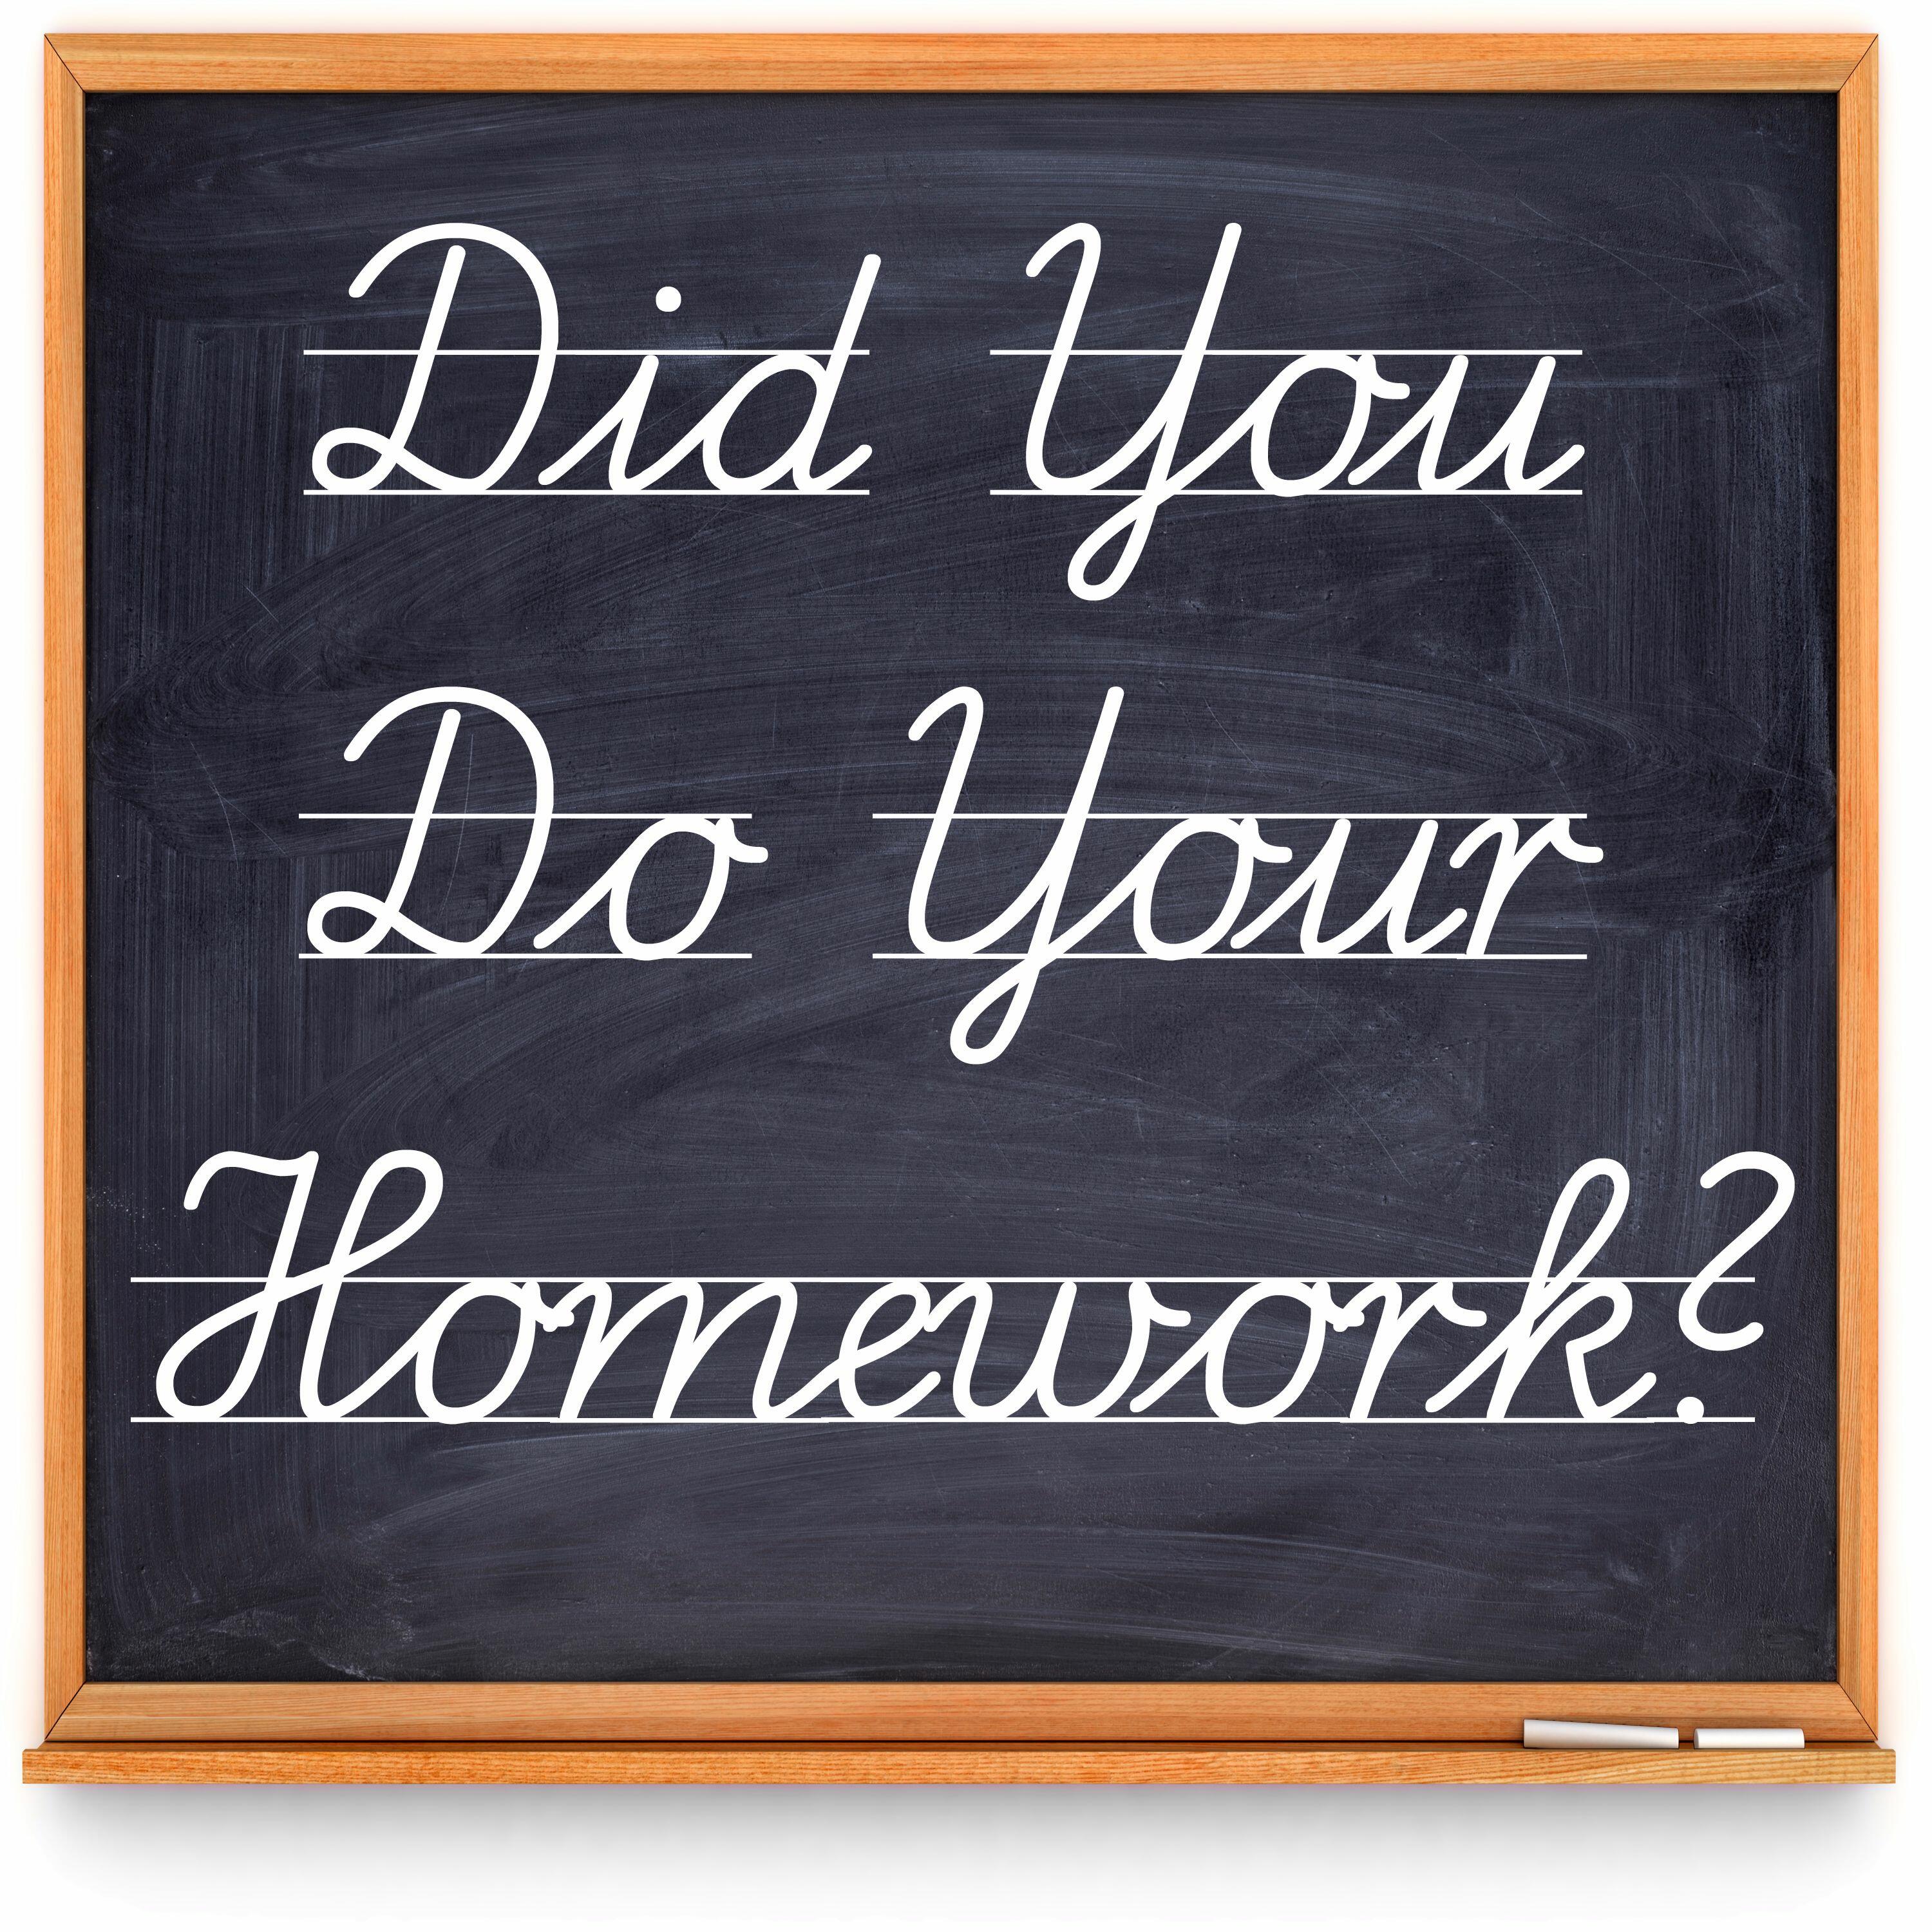 You can do your homework. Did you do your homework. Your homework. ... Do your homework in English. Homework картинка.